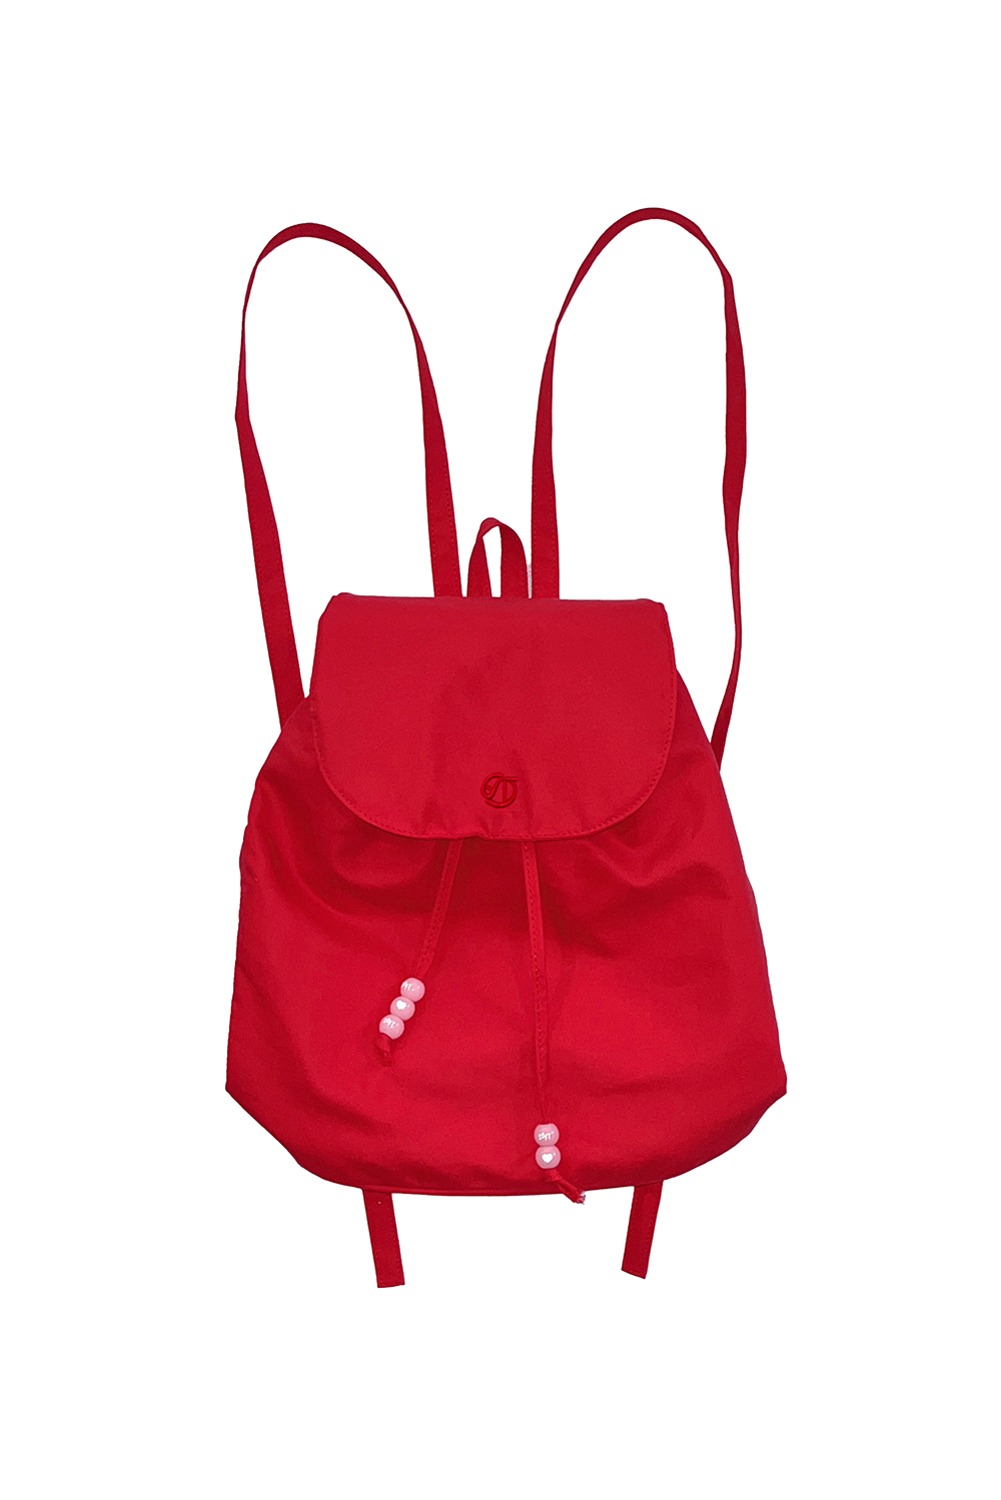 CHILI BACKPACK [RED]